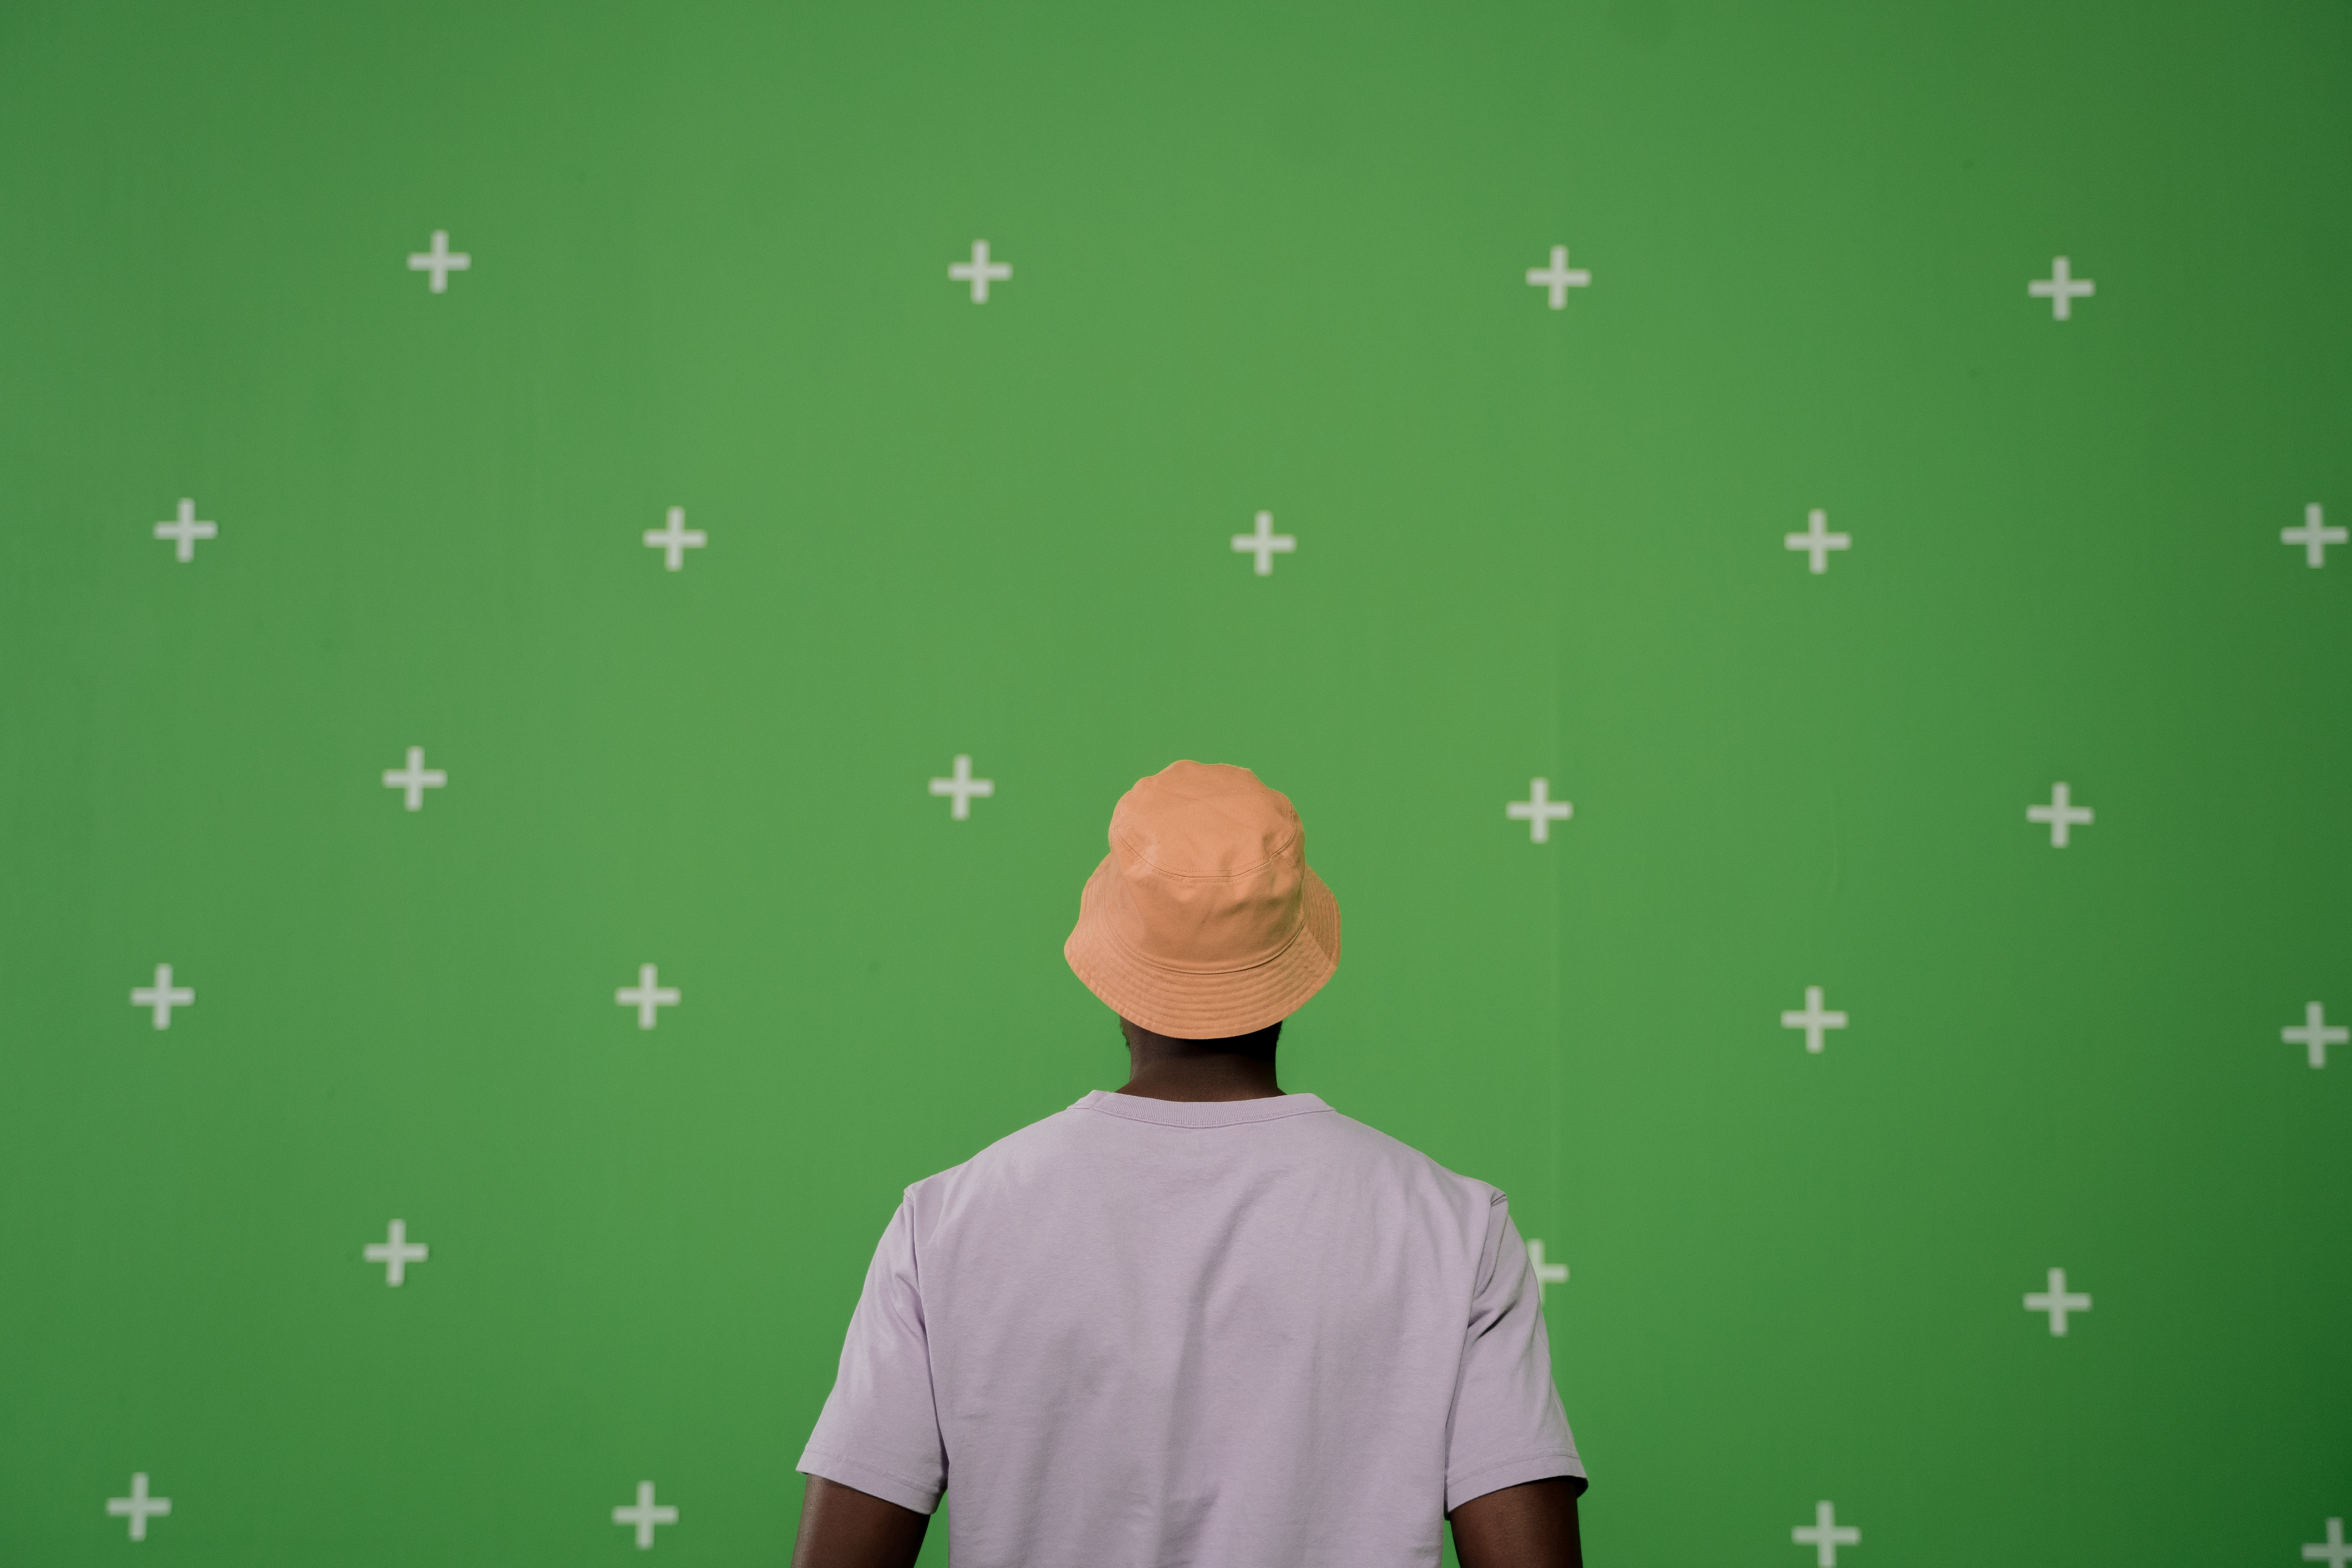 Tips For Using A Green Screen On Instagram